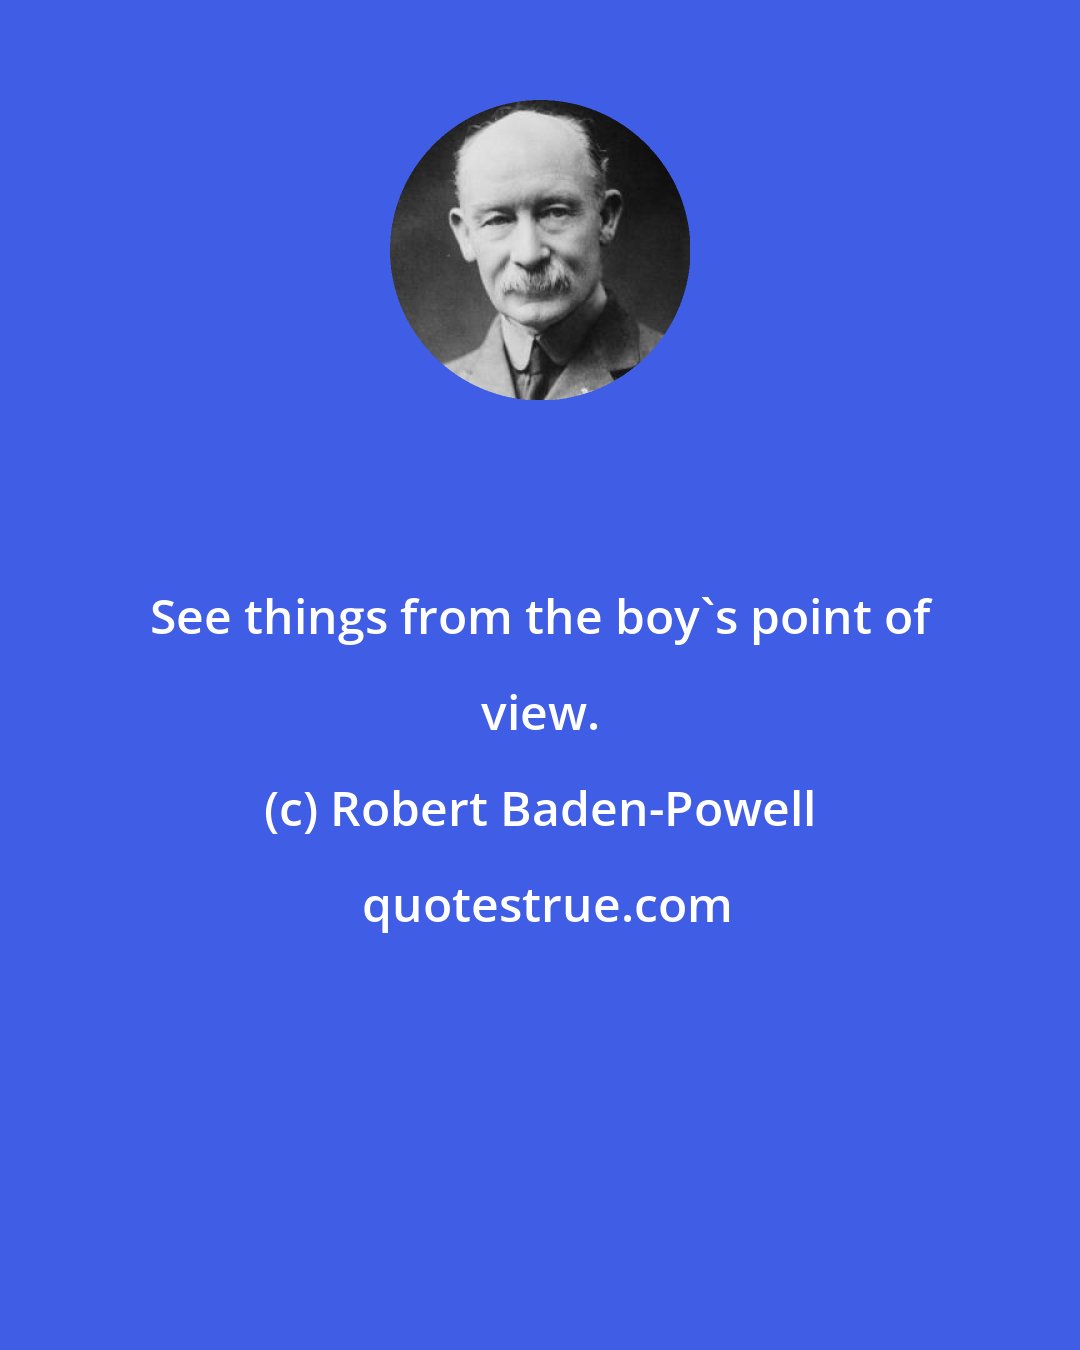 Robert Baden-Powell: See things from the boy's point of view.